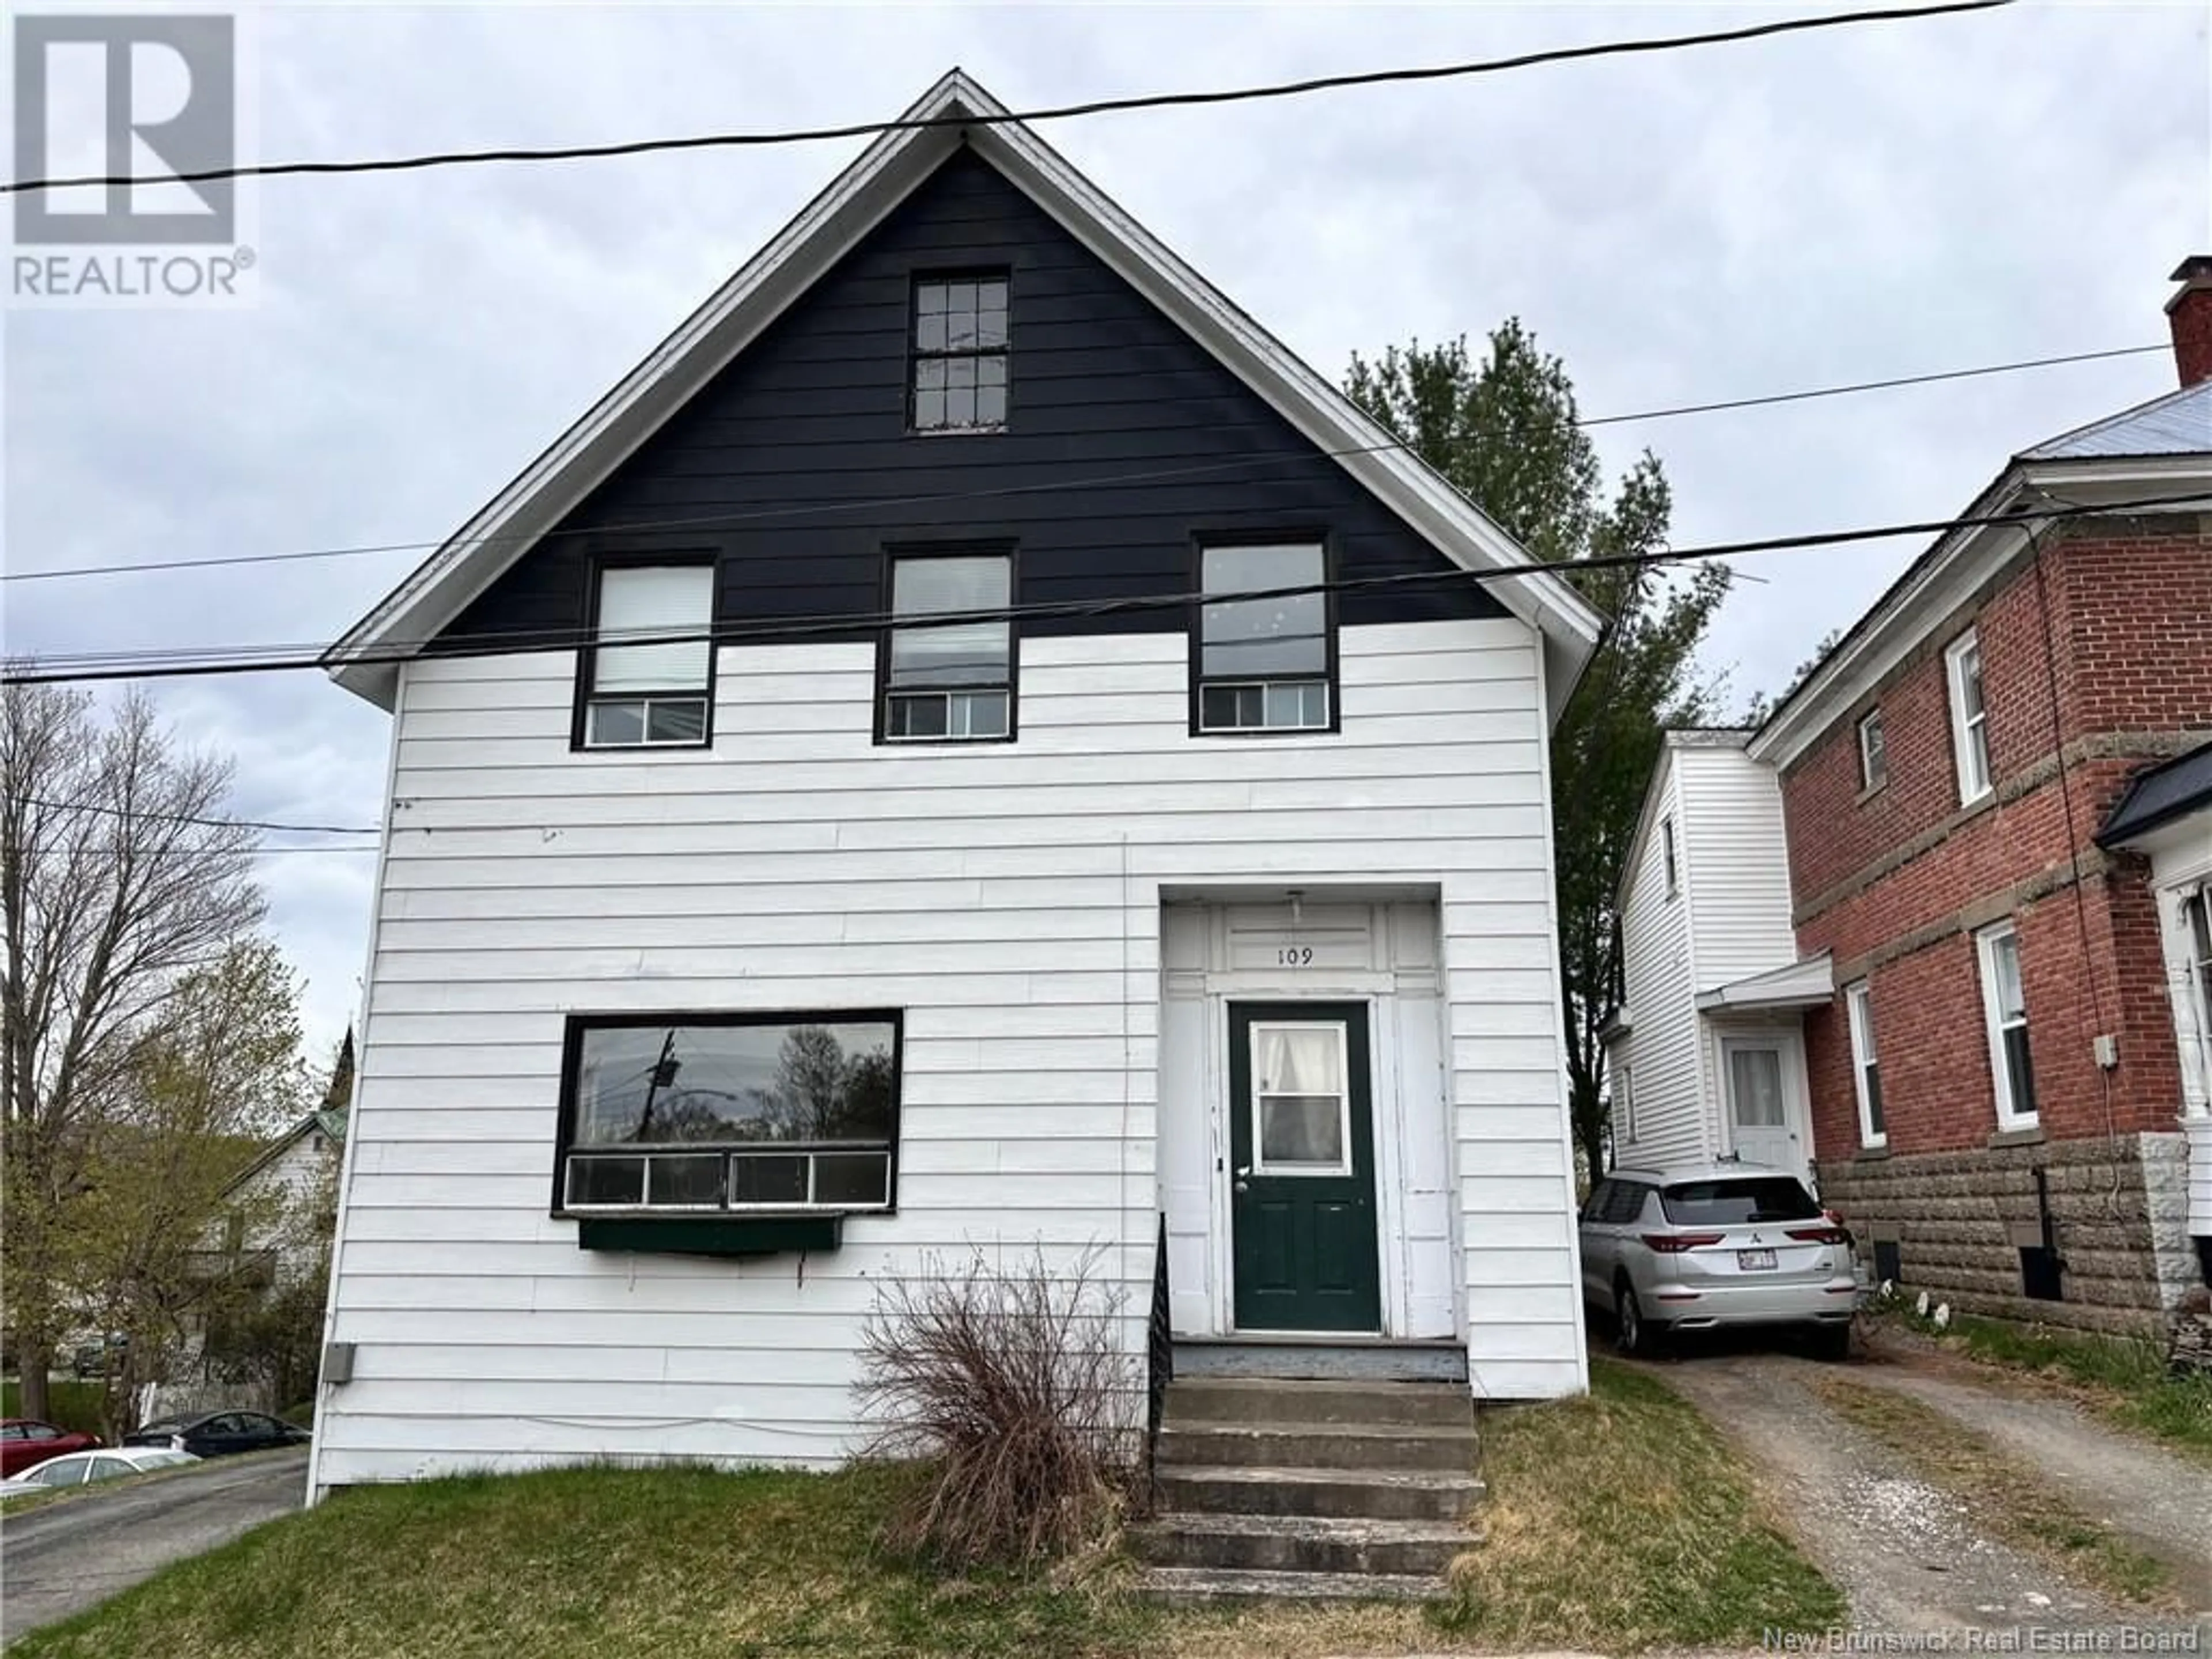 Frontside or backside of a home for 109 Victoria Street, Woodstock New Brunswick E7M3A4